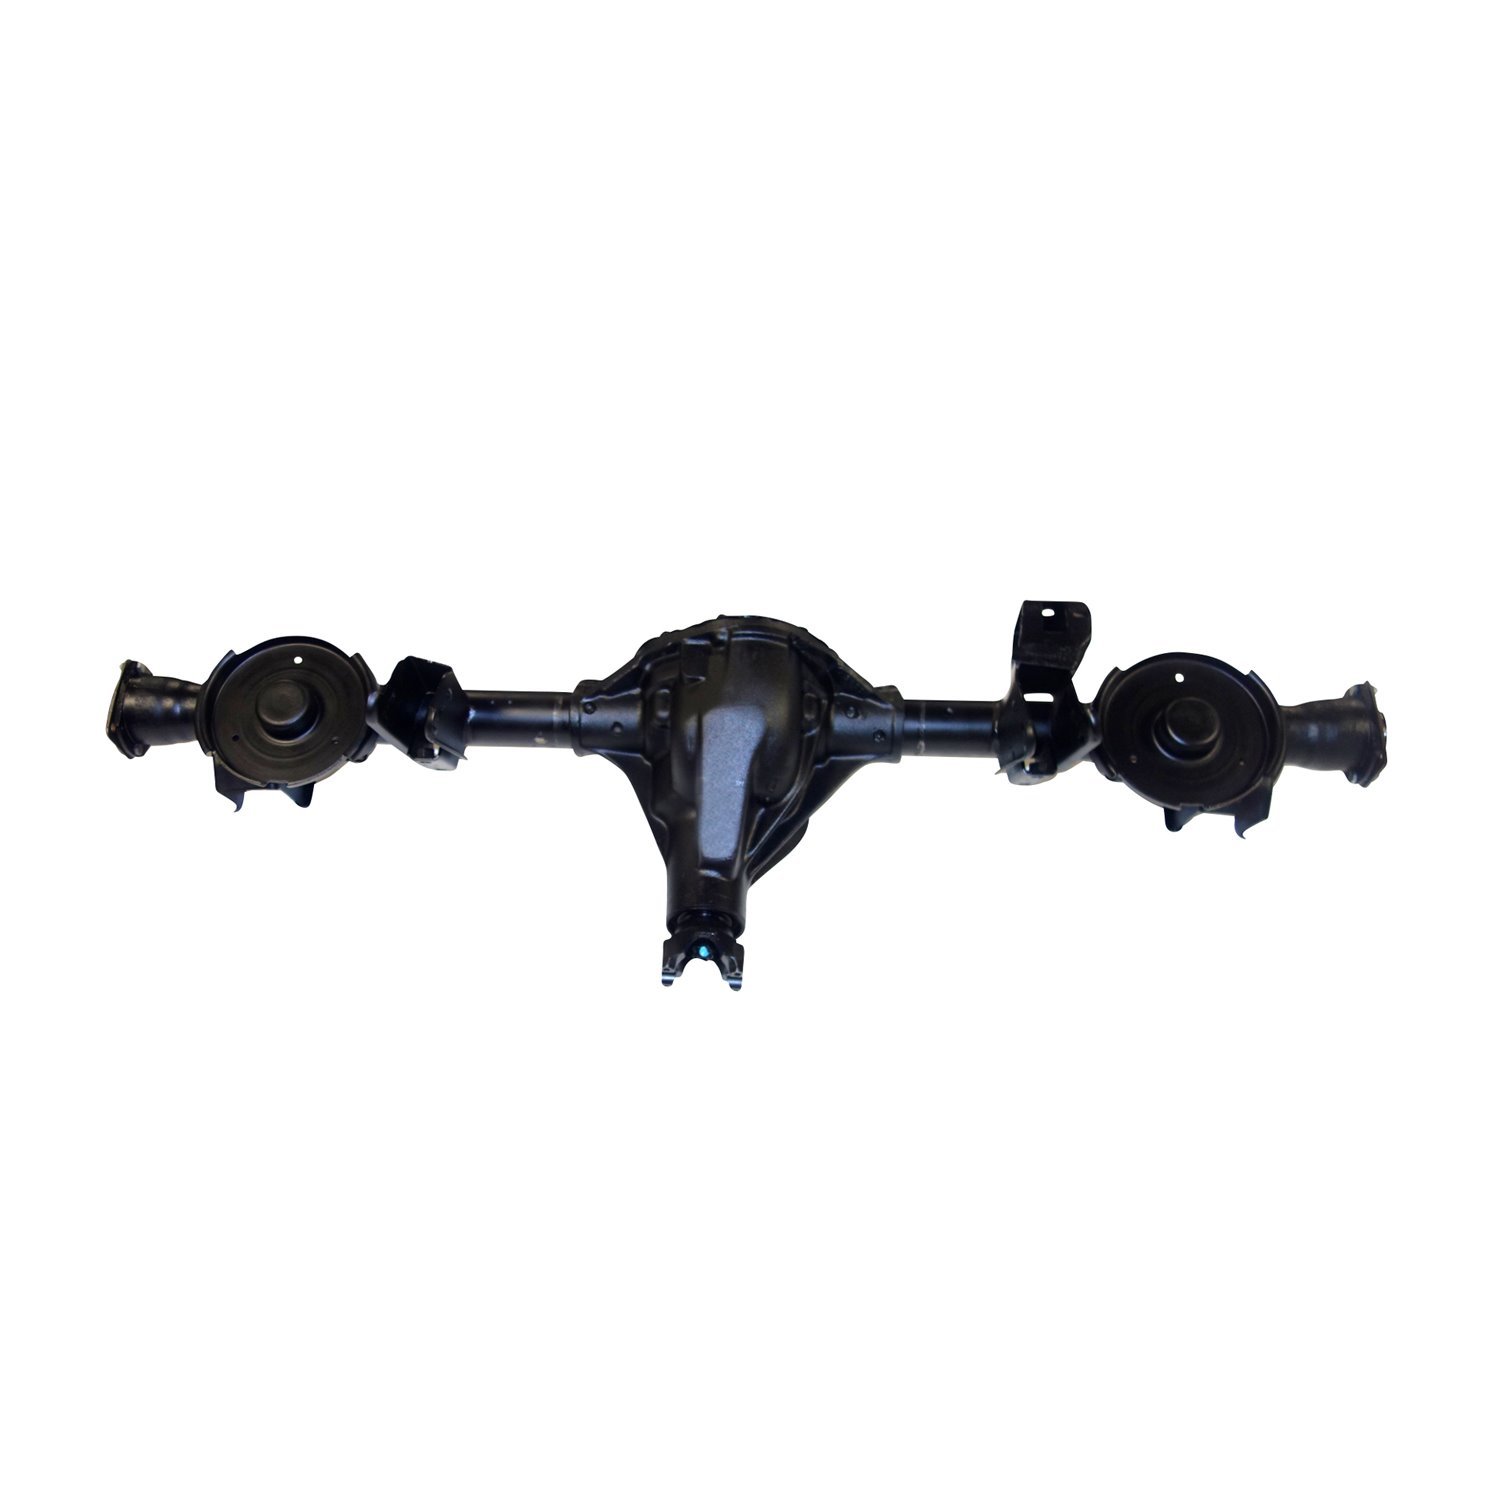 Remanufactured Complete Axle Assembly for Dana 44 06-10 Grand Cherokee Srt8 3.73